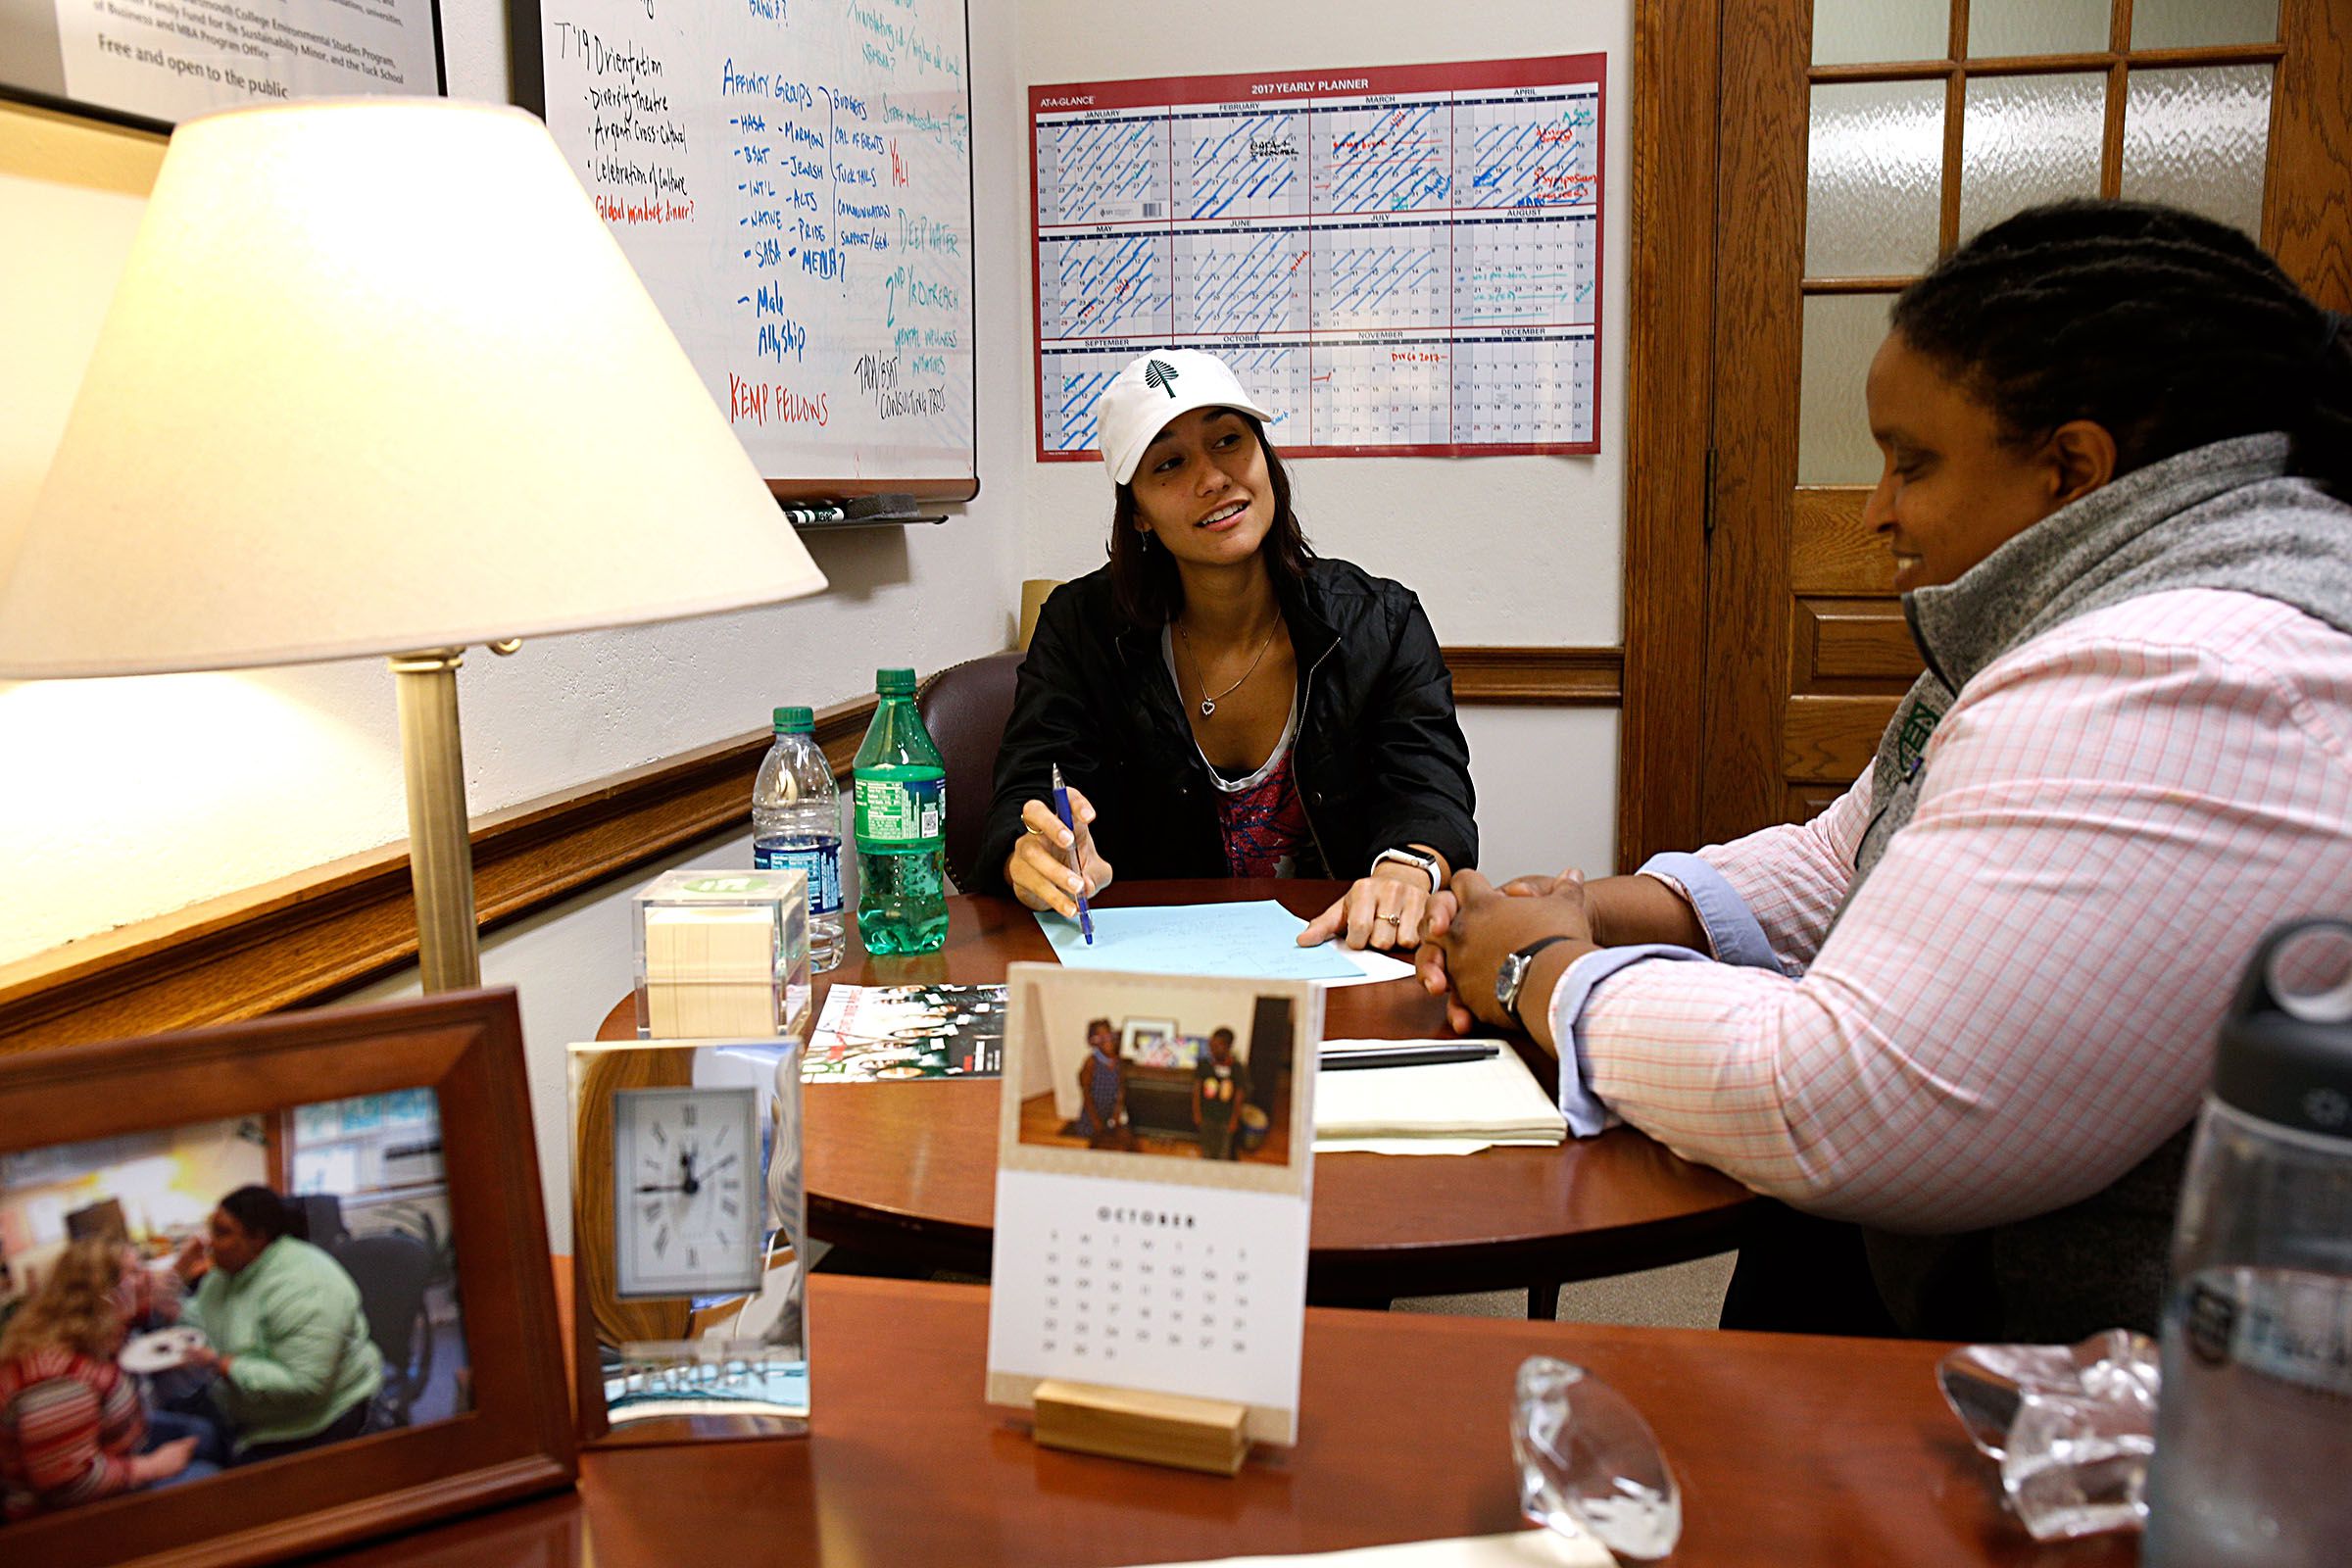 First year student Kat Hemsing speaks with Dia Draper, director of strategic initiatives at the Tuck School of Business, during a meeting in Draper's office in Hanover, N.H., on Oct. 24, 2017. Hemsing is a member of the student board and gets together with Draper monthly to talk about budgets and programs. (Valley News - Geoff Hansen) Copyright Valley News. May not be reprinted or used online without permission. Send requests to permission@vnews.com.